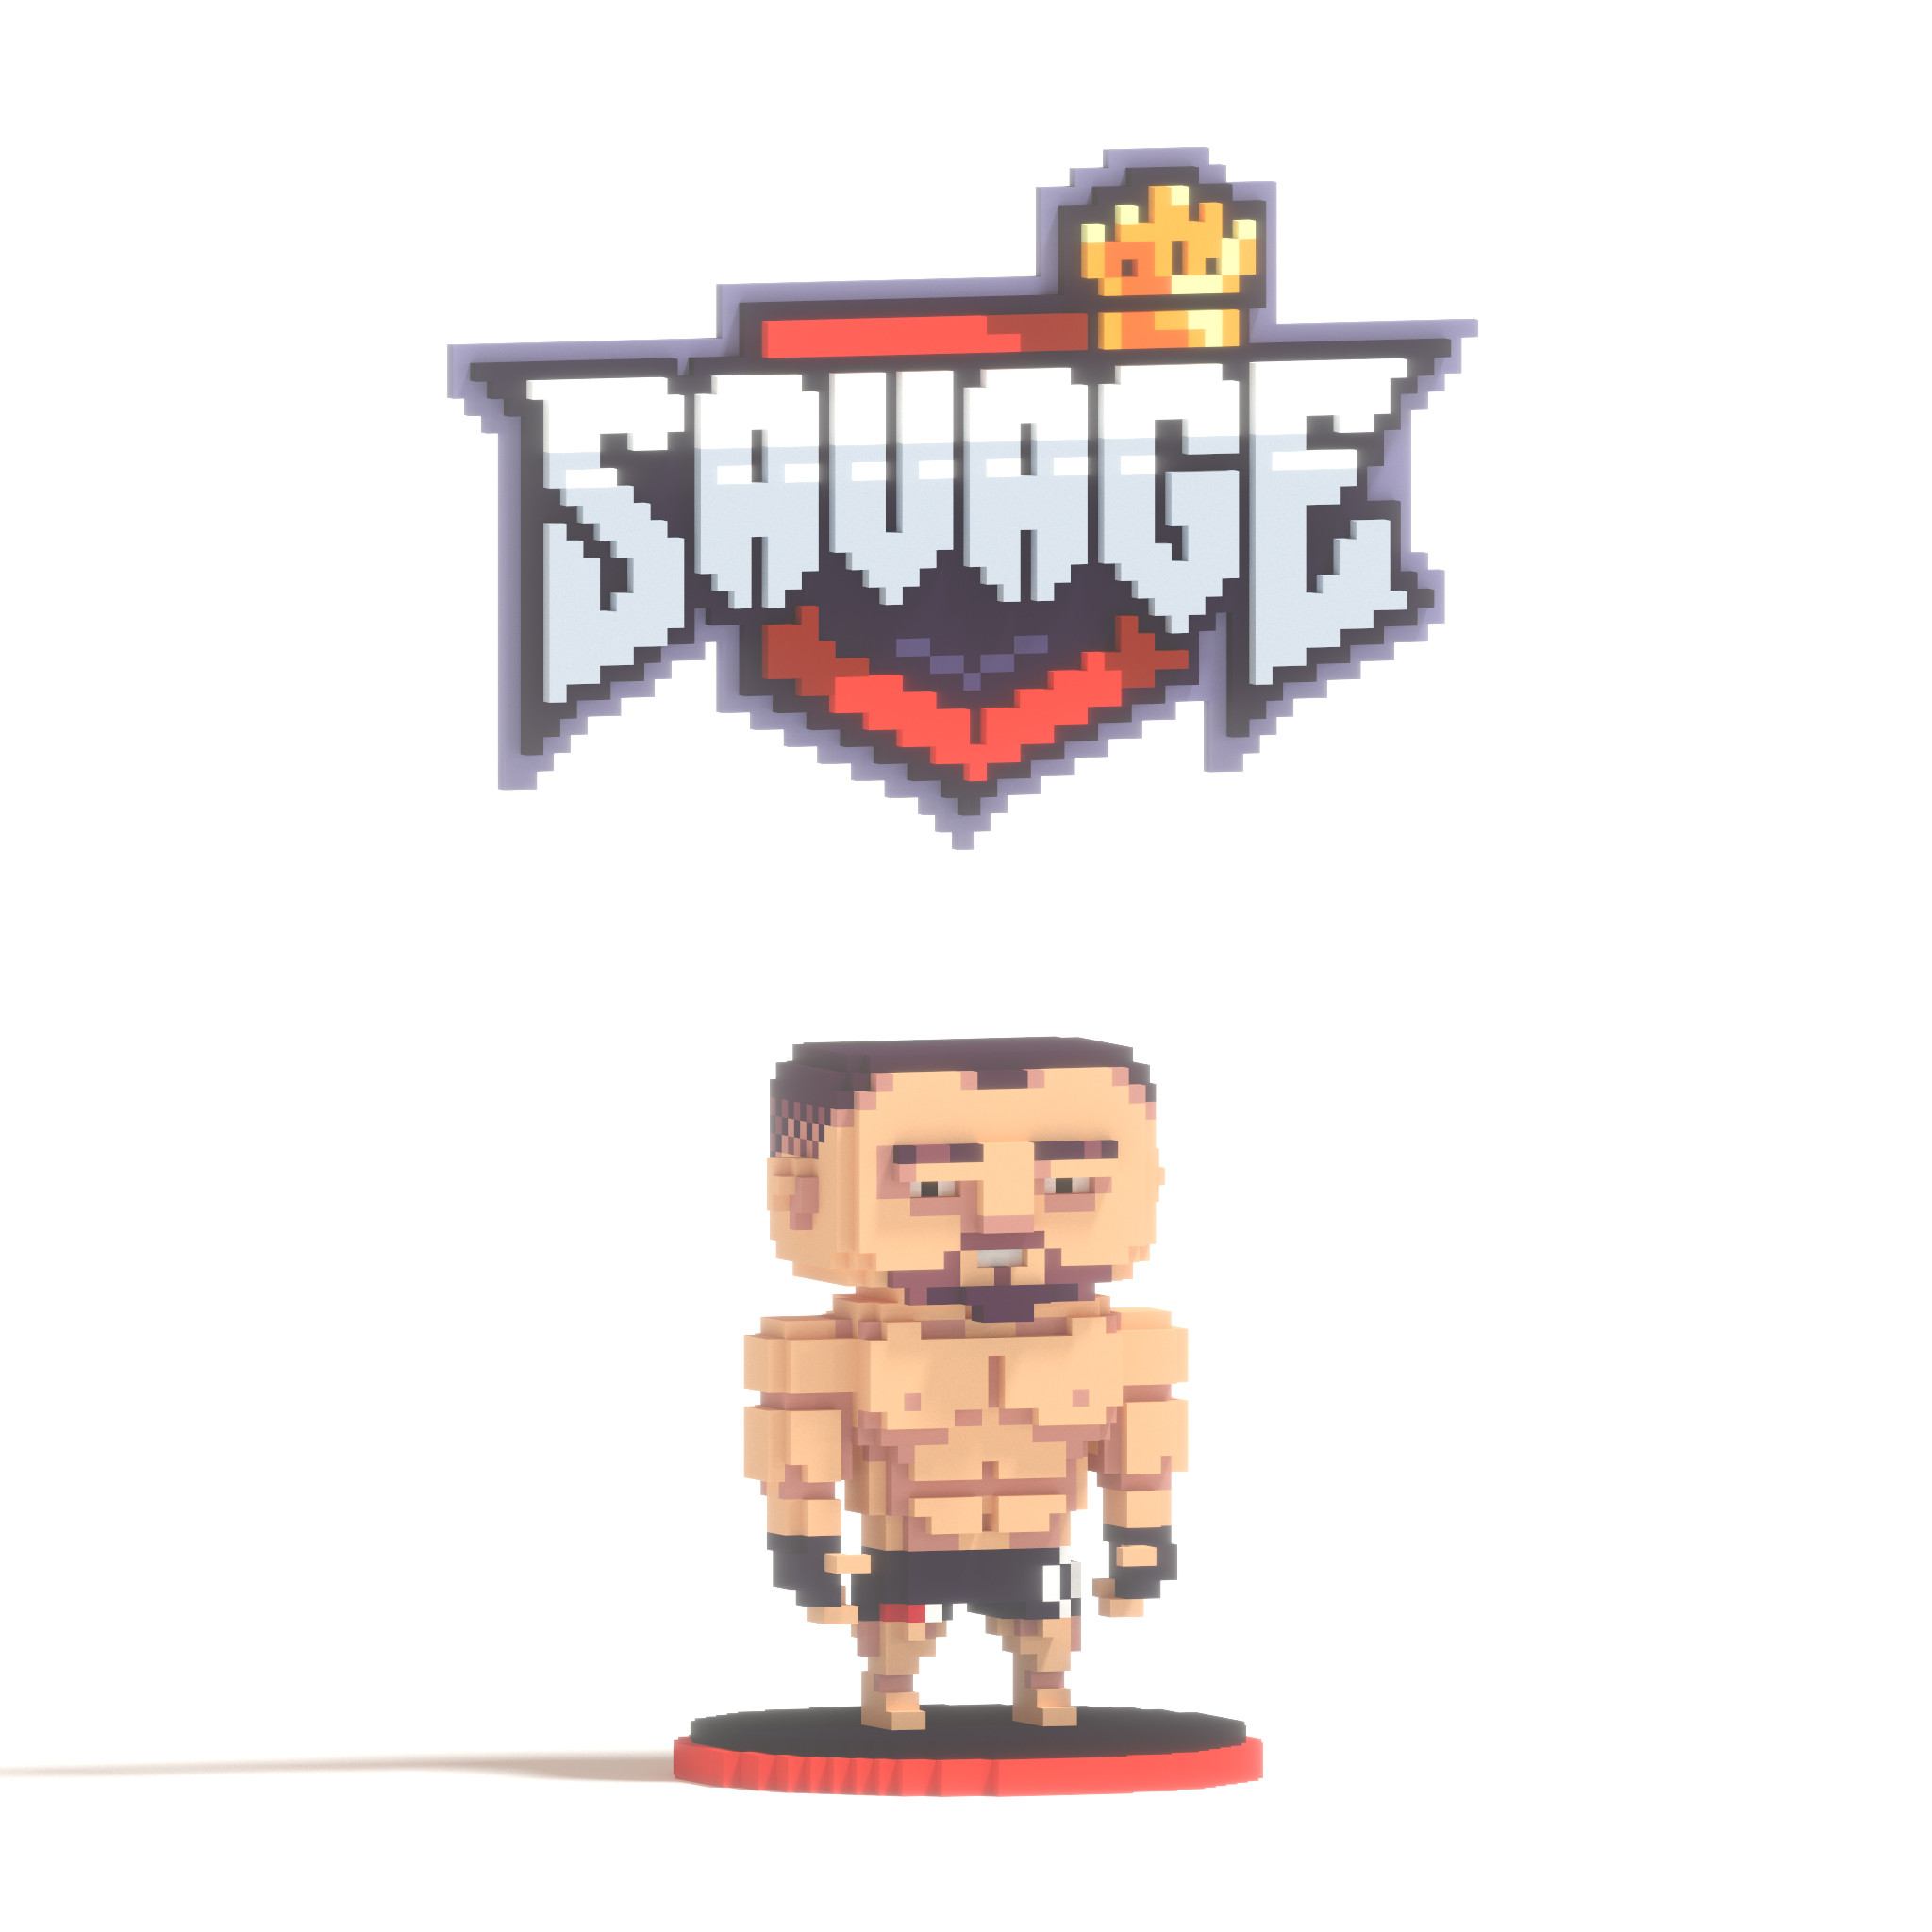 Richie "Savage" Lewis Voxel Character Figurine created and rendered in Magicavoxel.